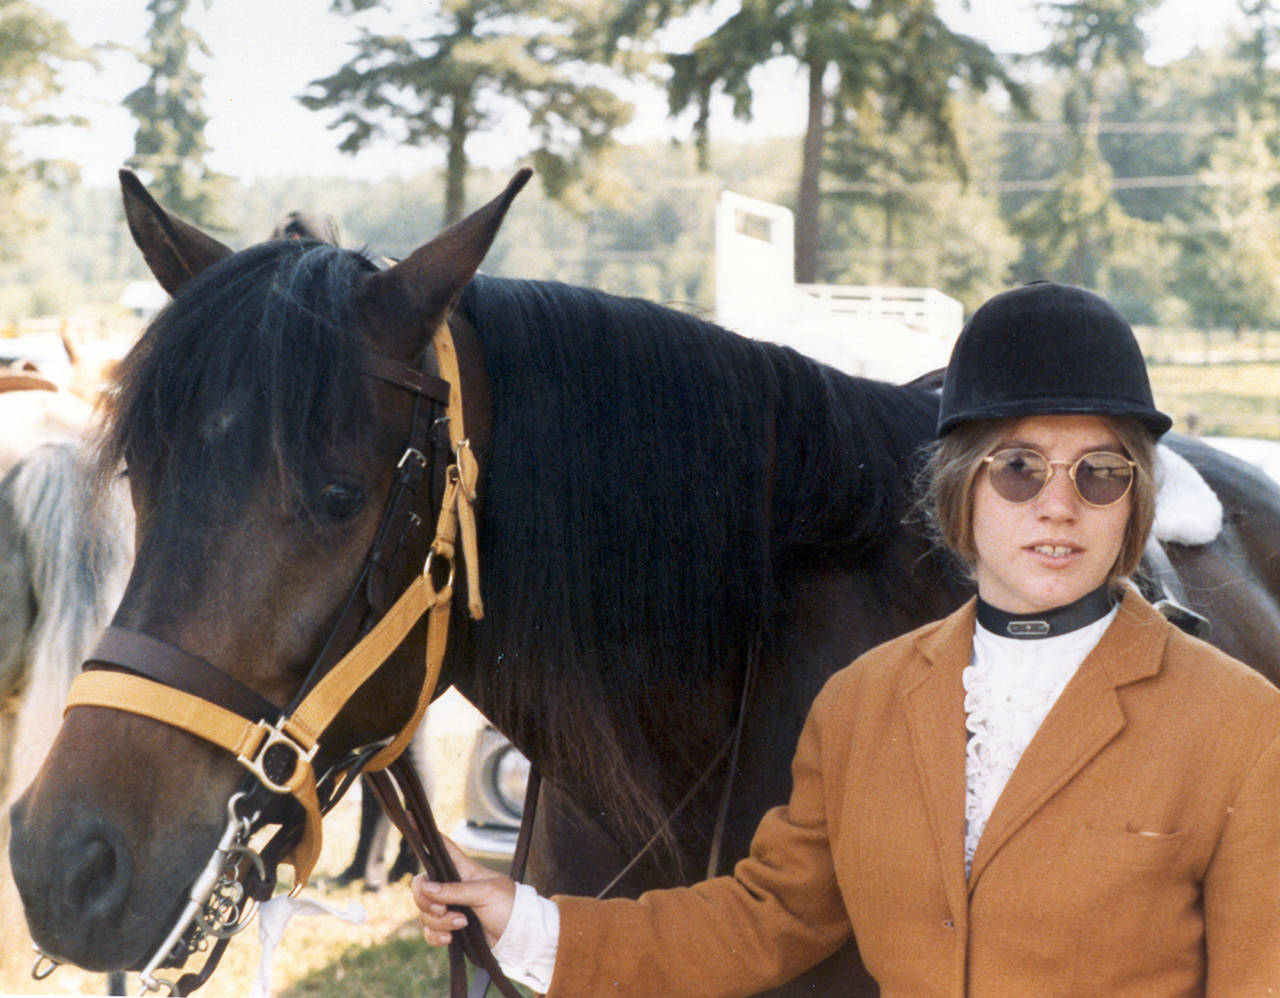 Jody Loomis is pictured with her horse in 1972. (Snohomish County Sheriff’s Office)